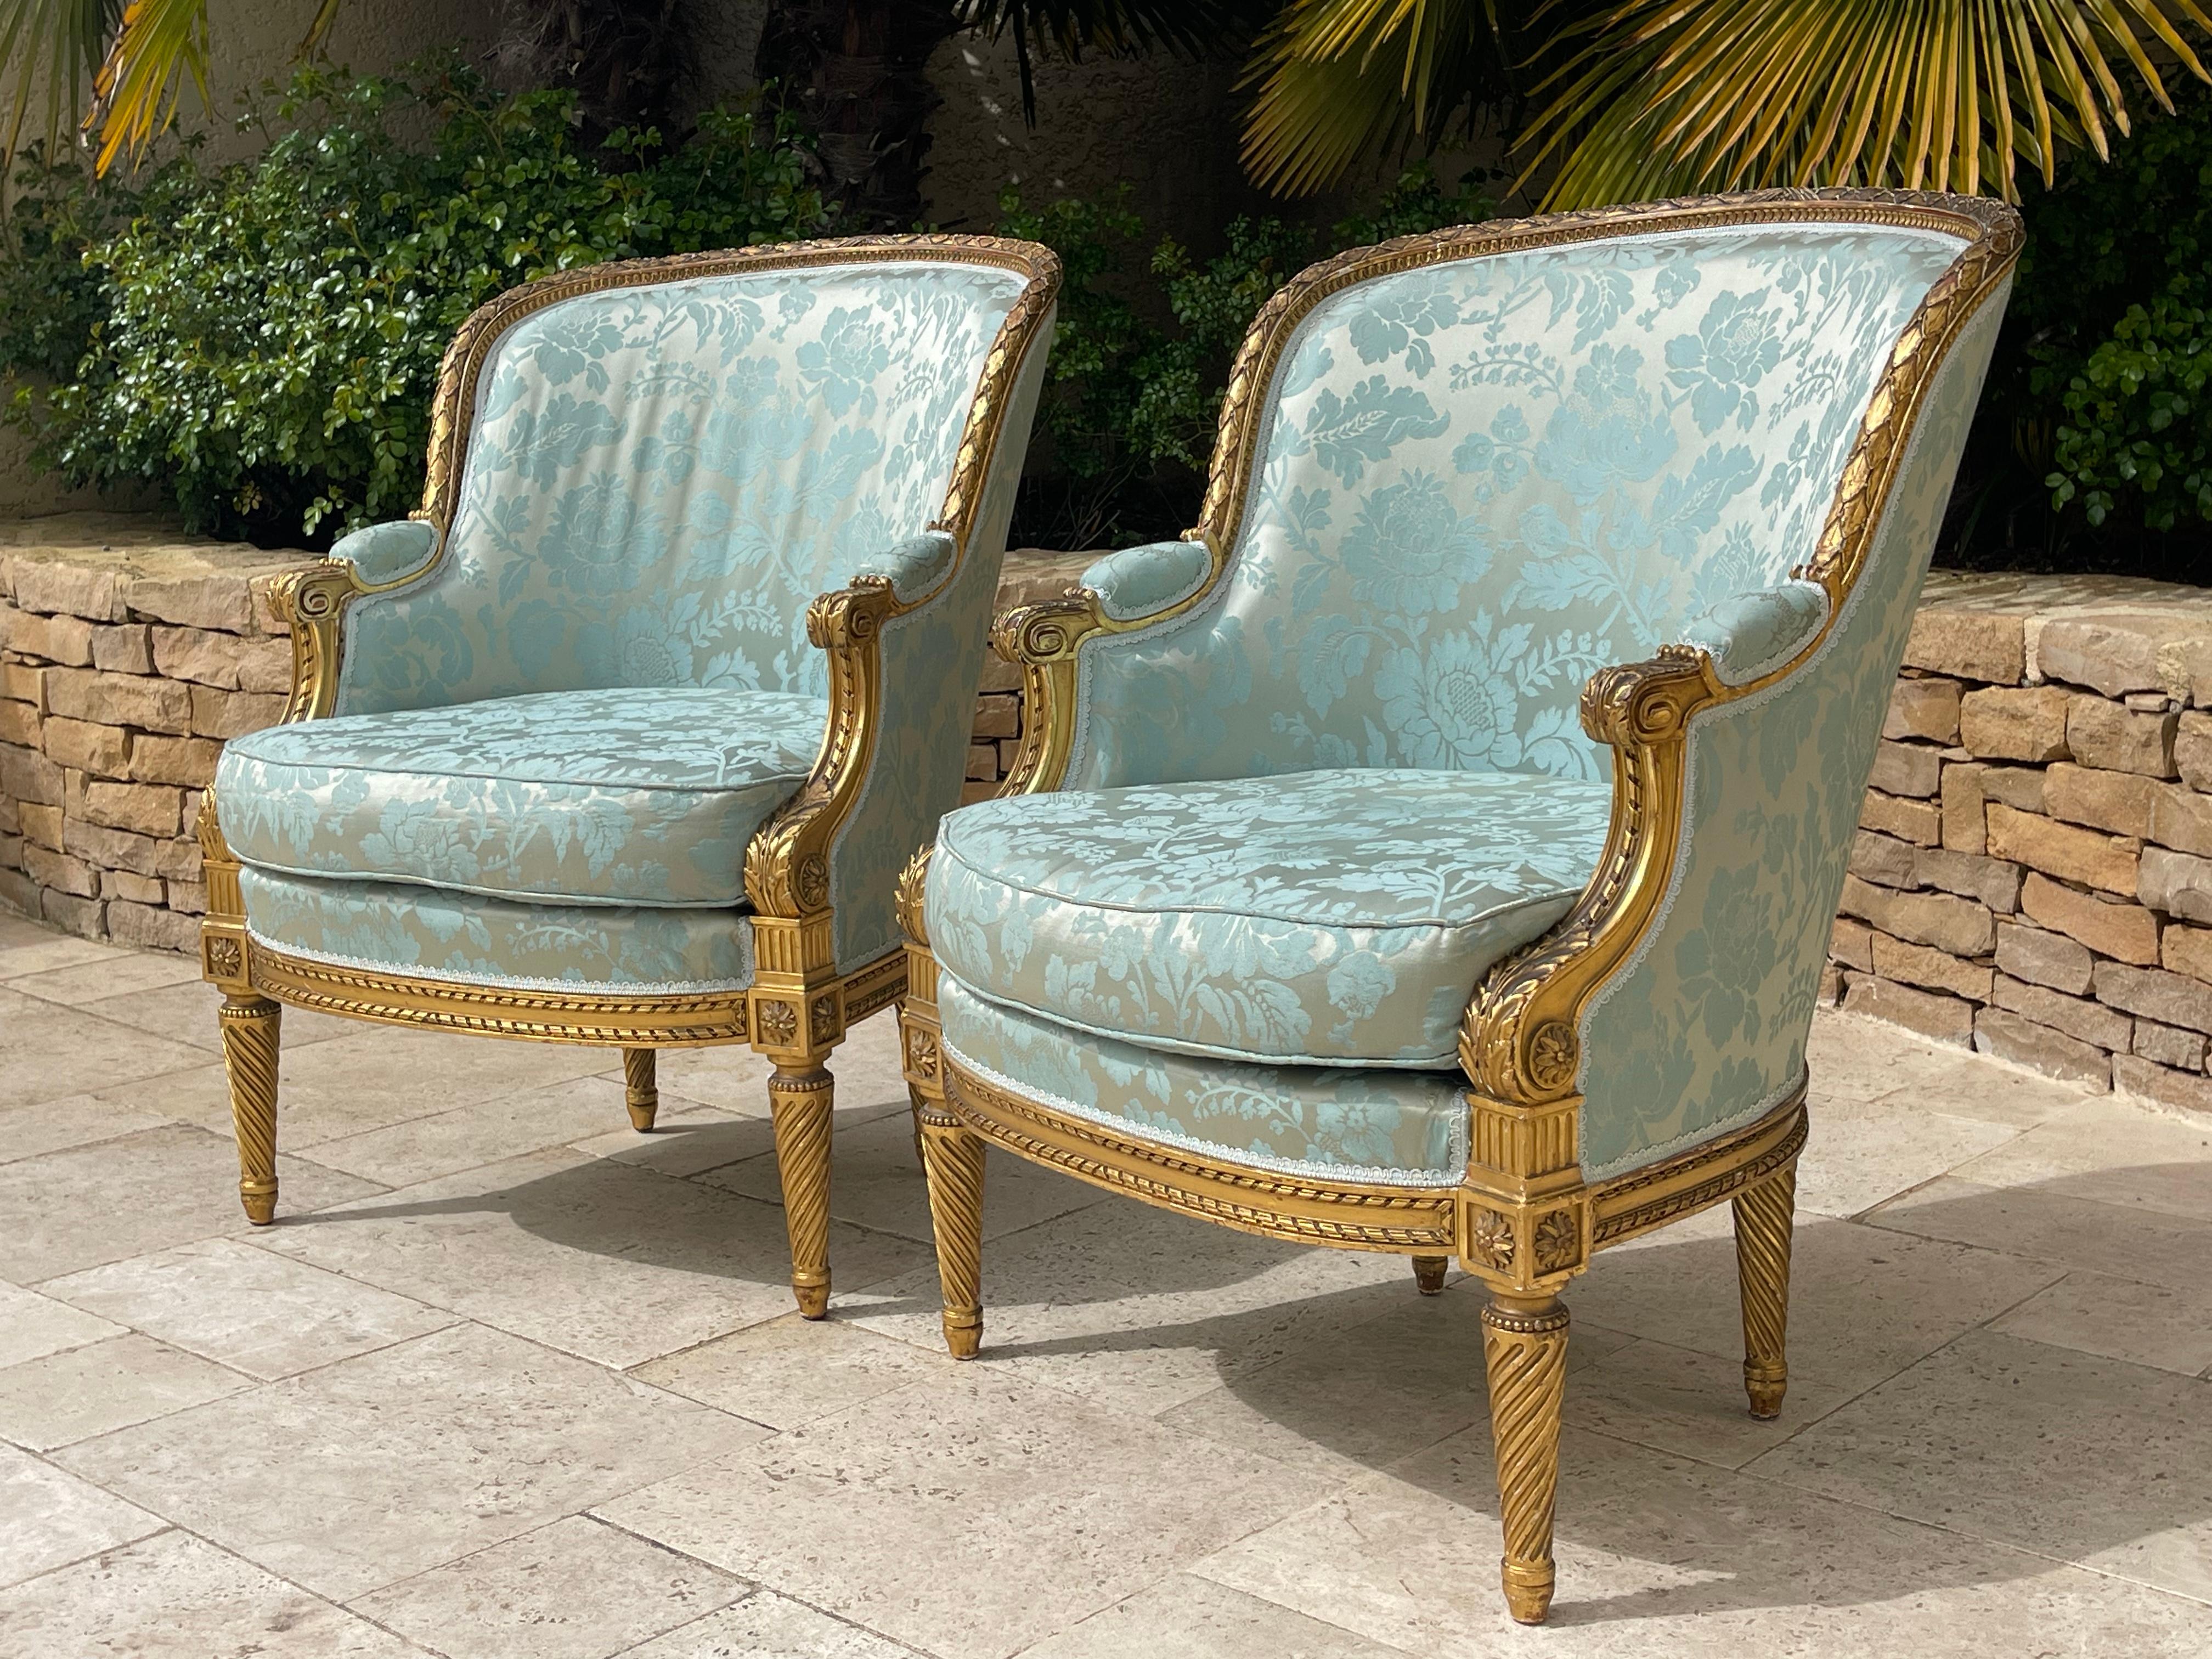 Pair of Louis XVI style gilded wood armchairs covered with floral patterned fabric. 'The size is very important and imposing. They are very decorative, the structure is entirely original and the gilding is with gold leaf. Solid and very stable,